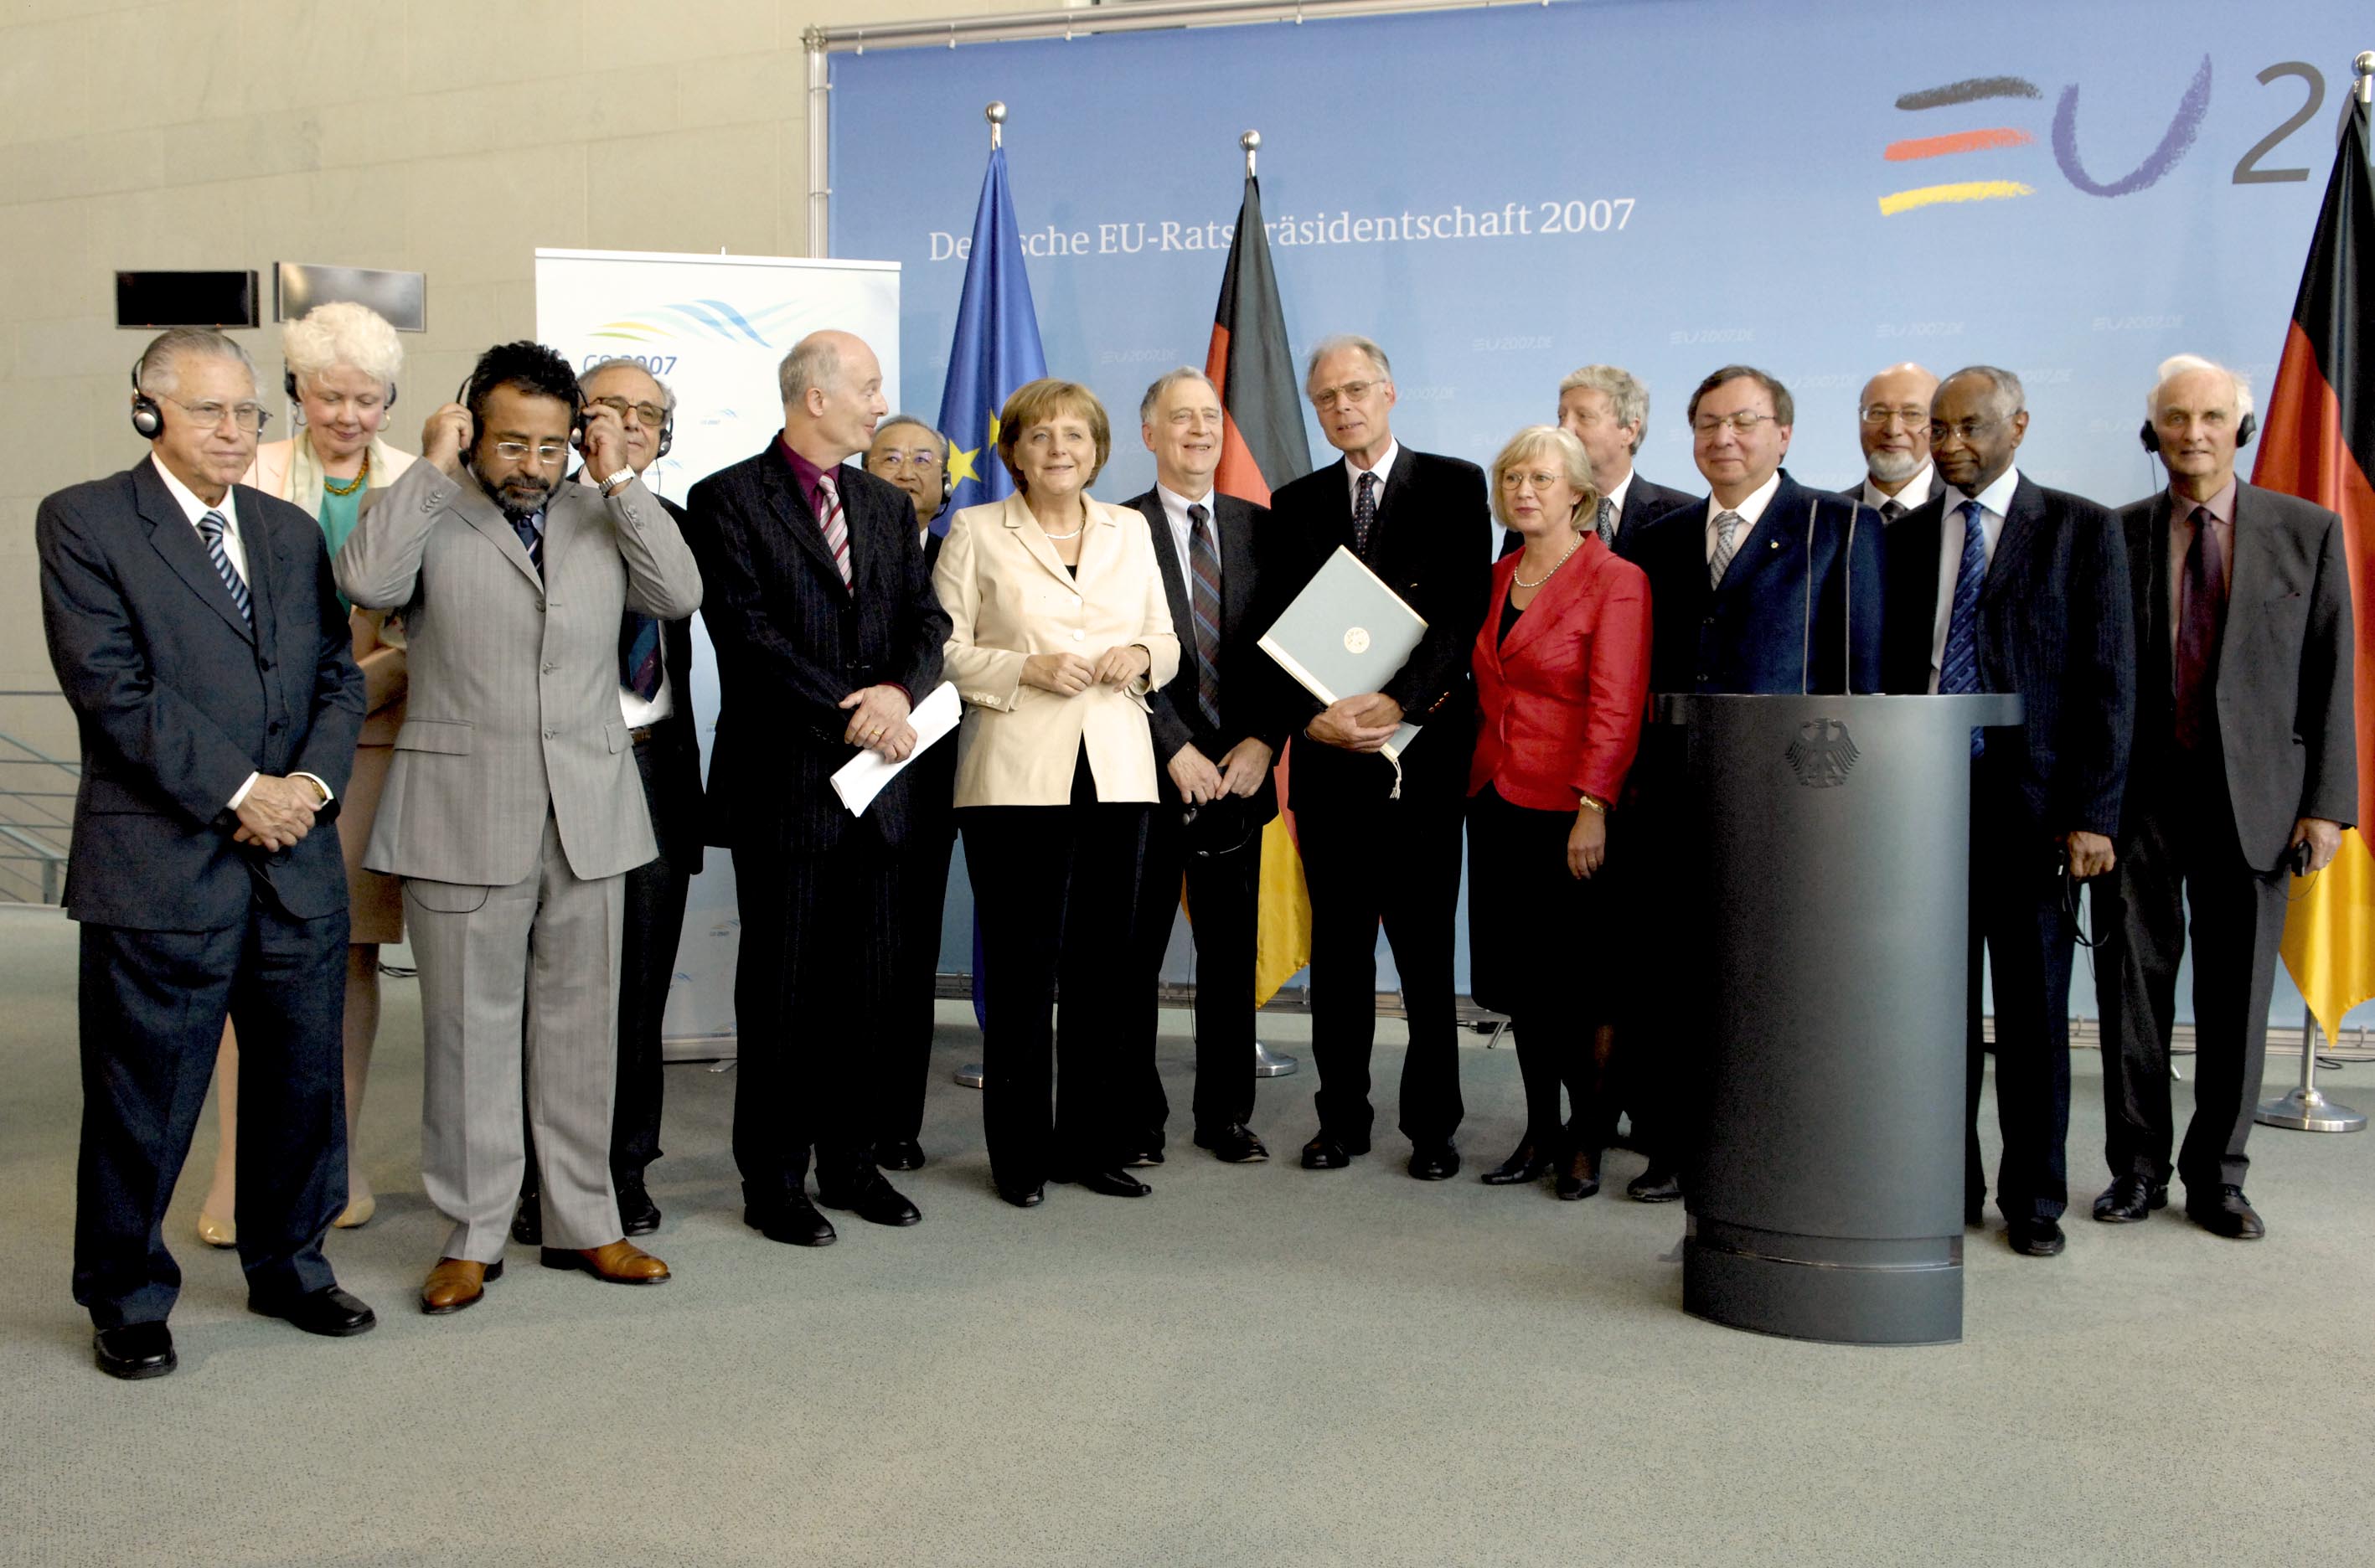 Joint science academies` statement on climate protection handed over to Chancellor Merkel